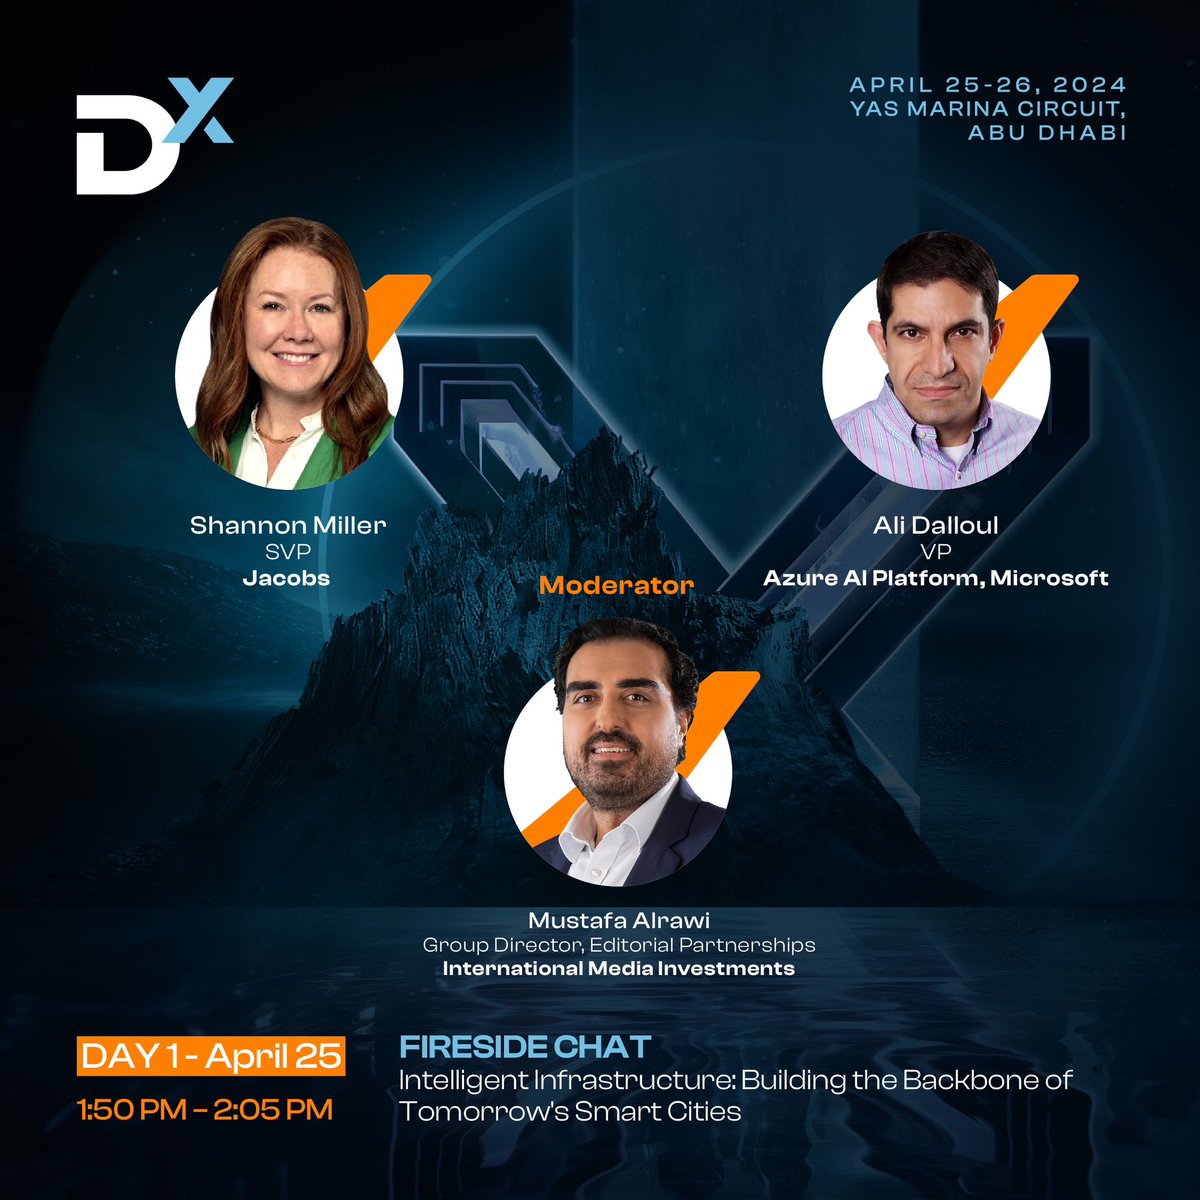 Dive into the heart of innovation with our Fireside Chat on Intelligent Infrastructure! Discover how cutting-edge technology is revolutionizing the way we build and manage our cities. @Bayanatg42 @InvestAbuDhabi @saviabudhabi @AbuDhabiDMT